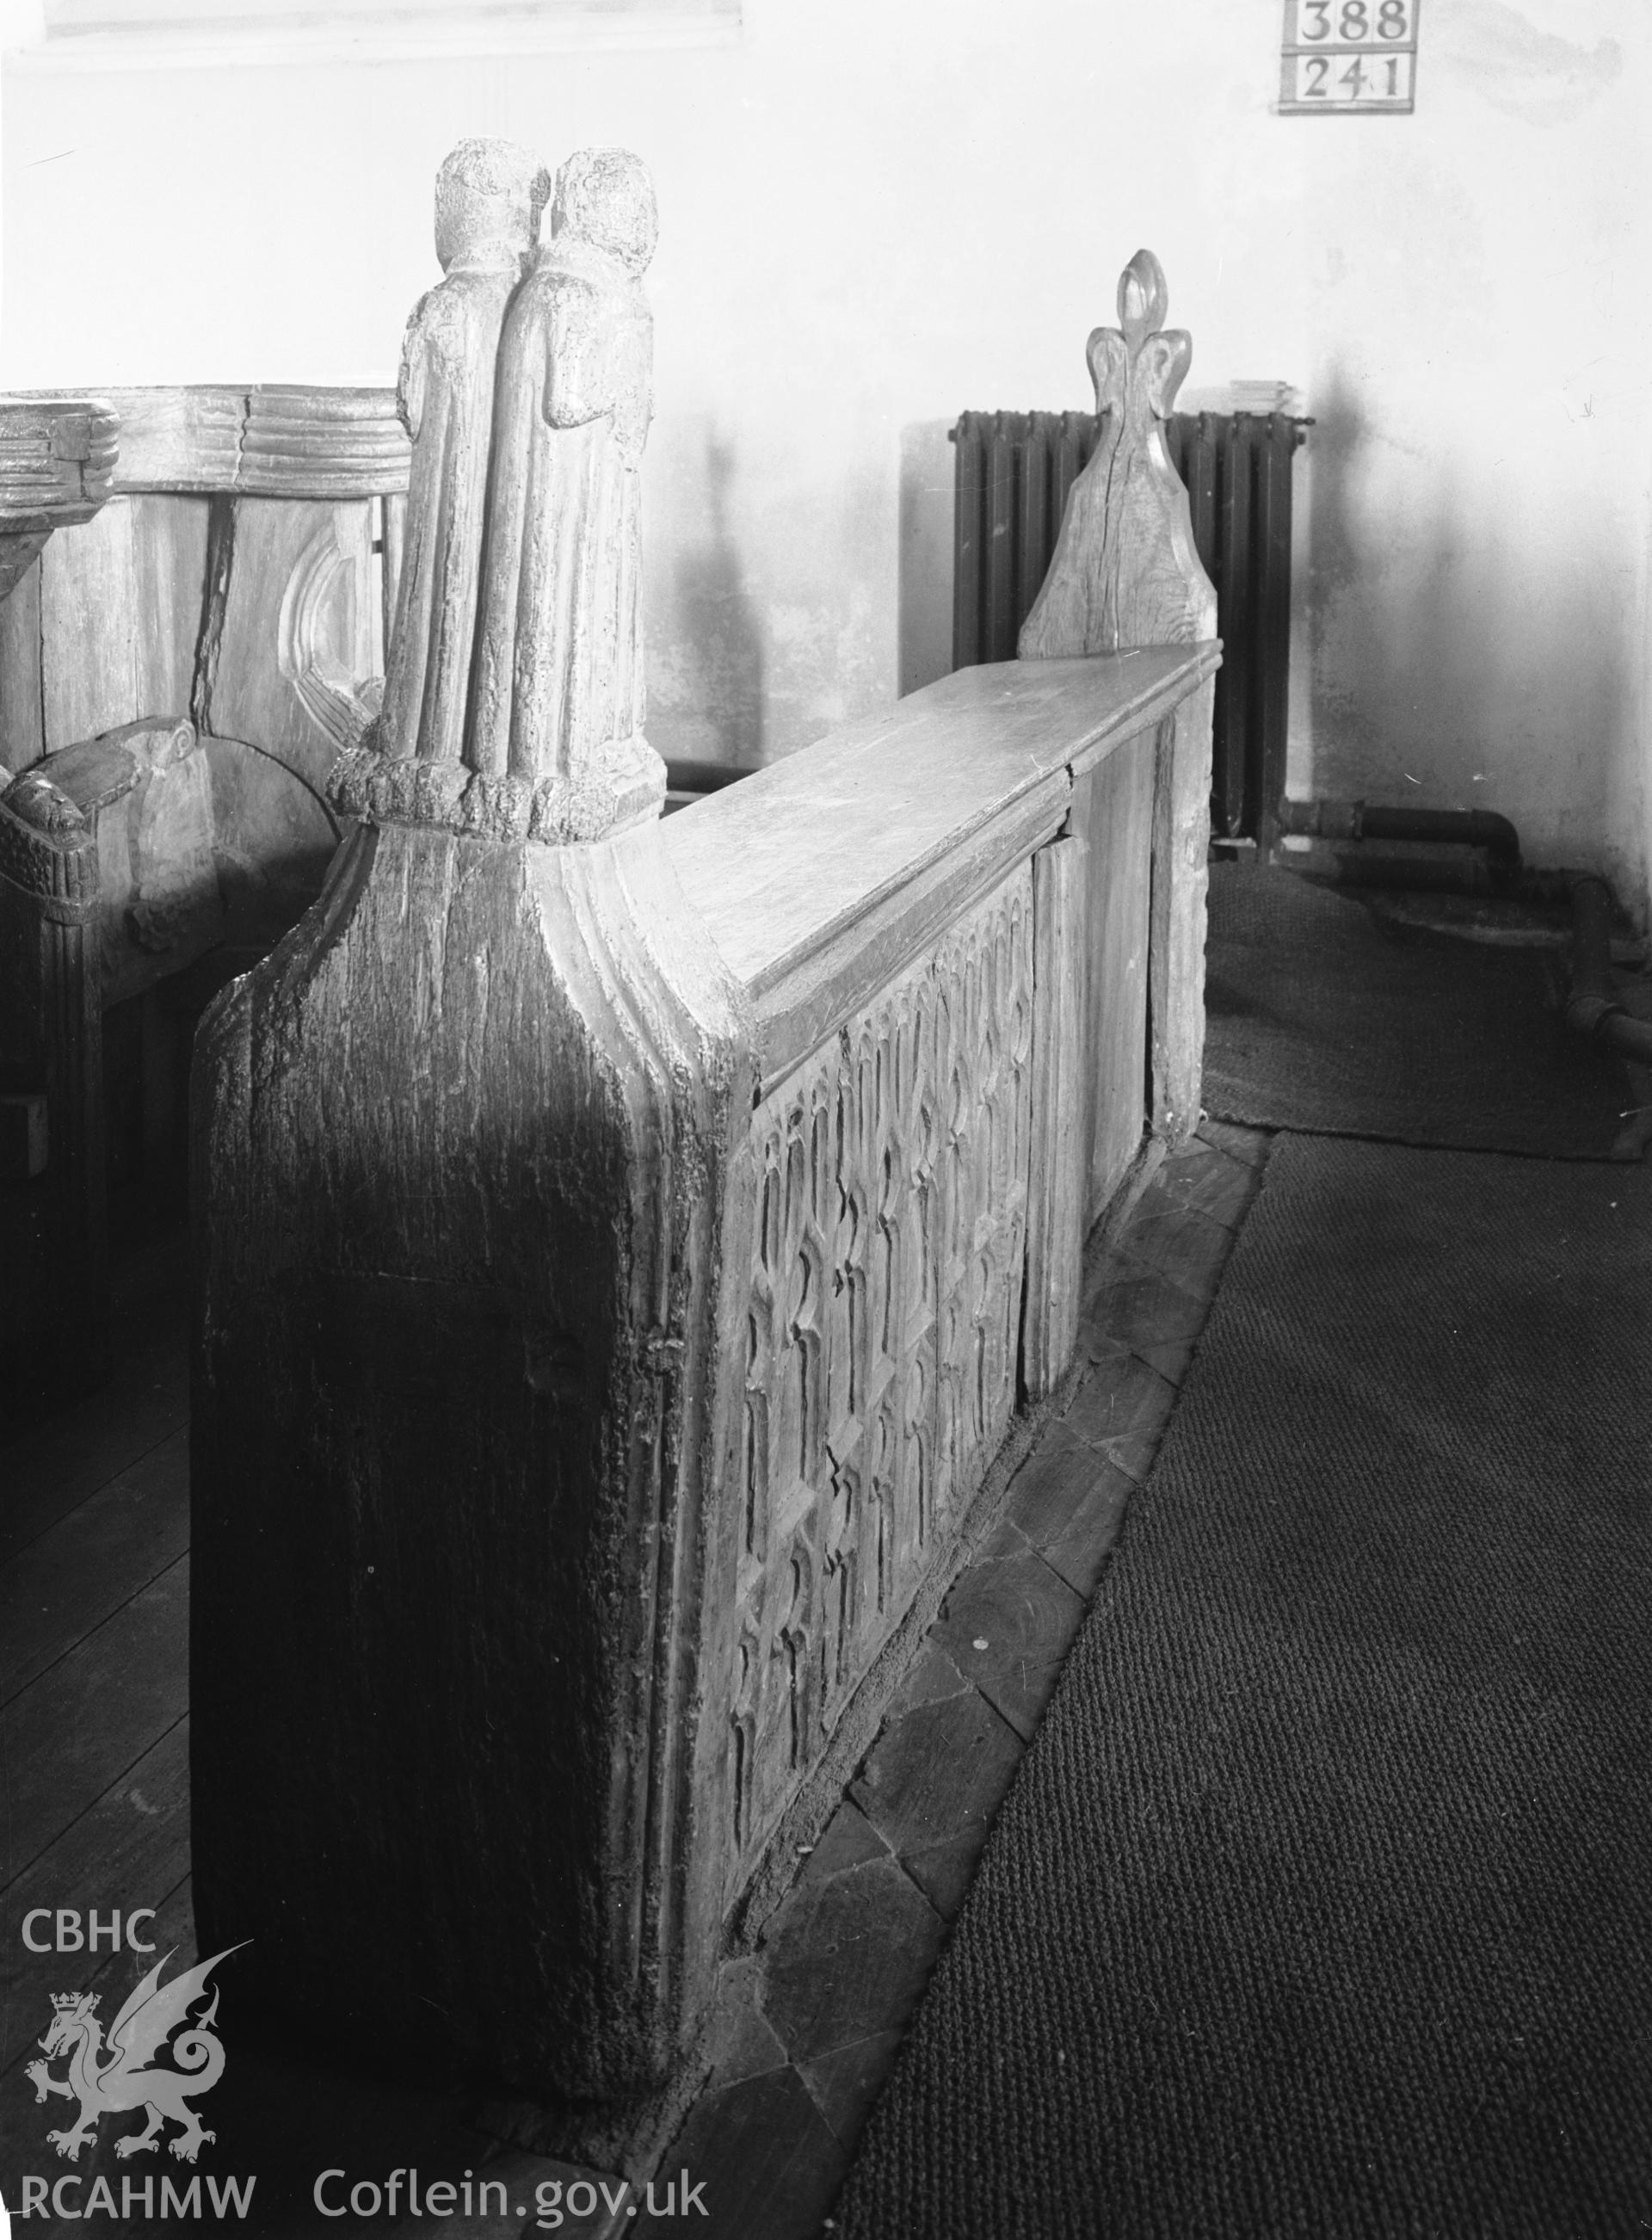 Interior view showing double figure finial on the stalls.